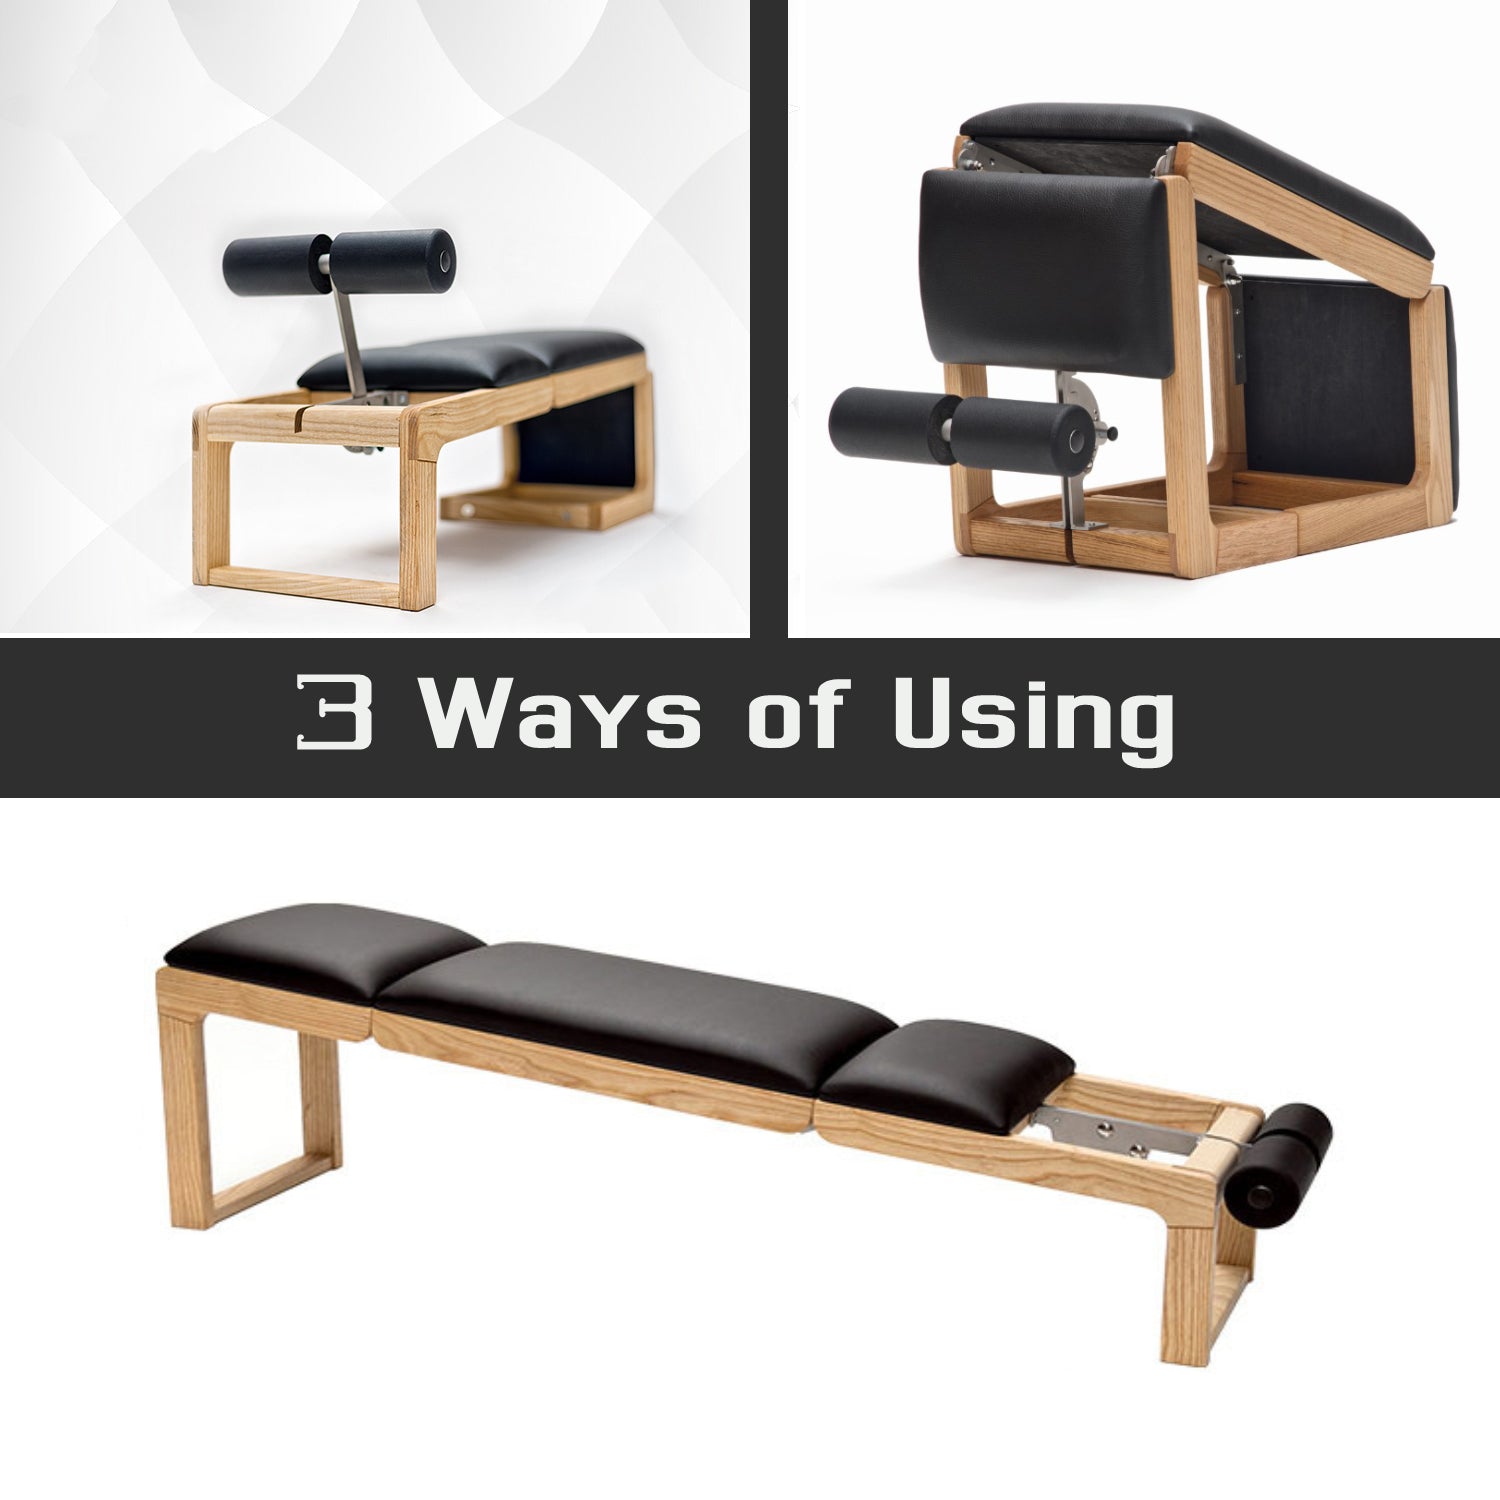 Pilates Foldable ABS Board Chair and Yoga Bed - 3 ways of using - Personal Hour for Yoga and Meditations 